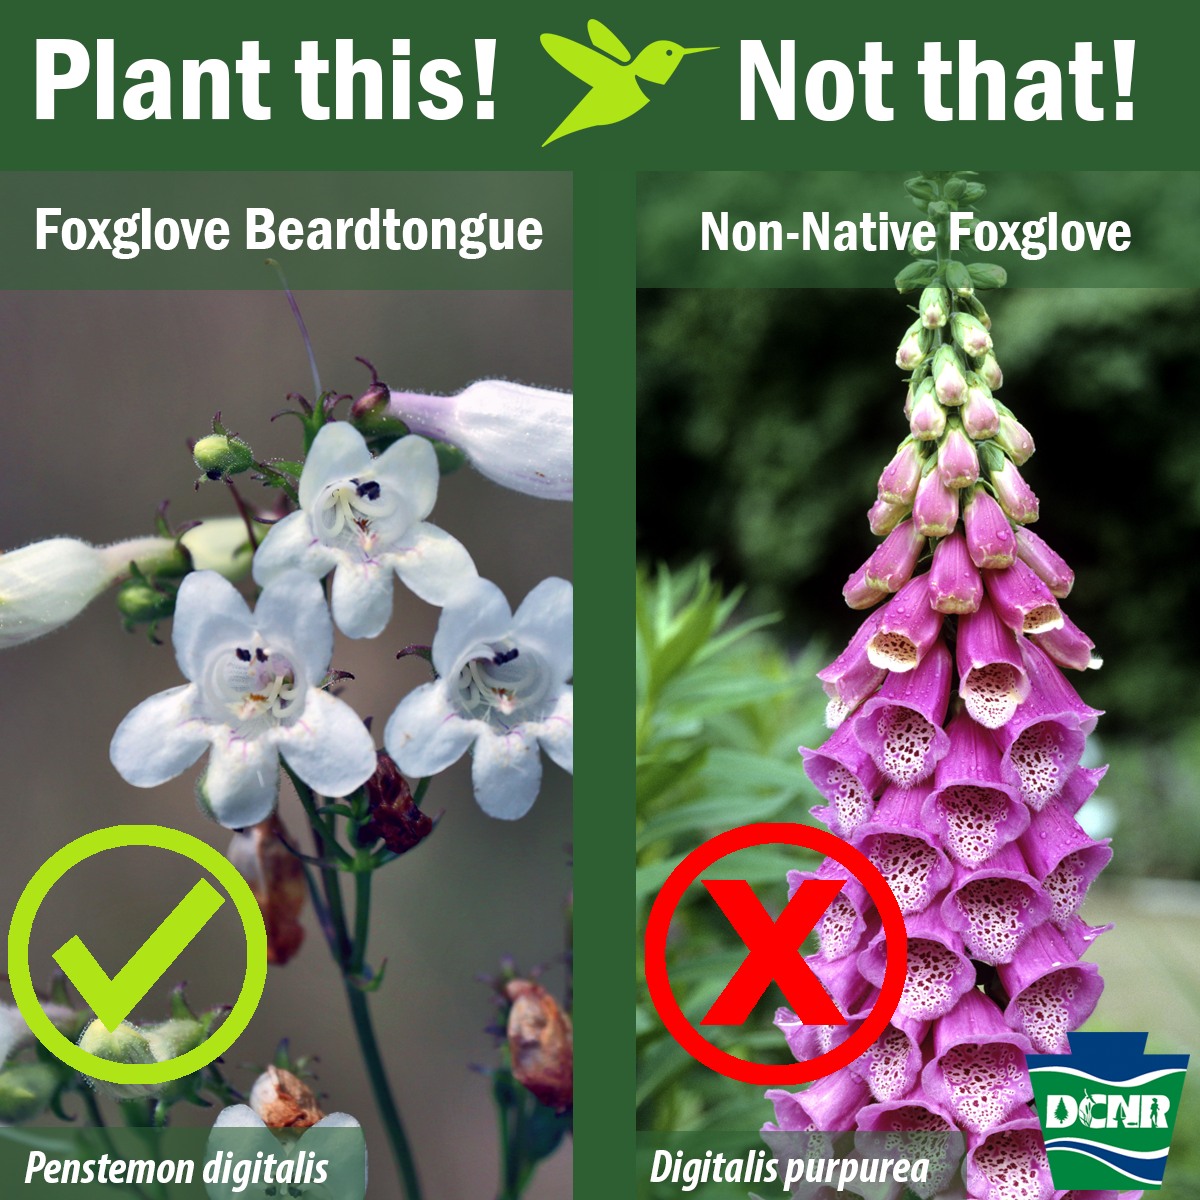 Non-native foxglove can spread from backyards to natural areas, threatening biological diversity, and all parts of the plant are poisonous. Native foxglove beardtongue is a good alternative, not poisonous and is helpful for pollinators ➡️ bit.ly/2JZs99I. #PaNativeSpecies